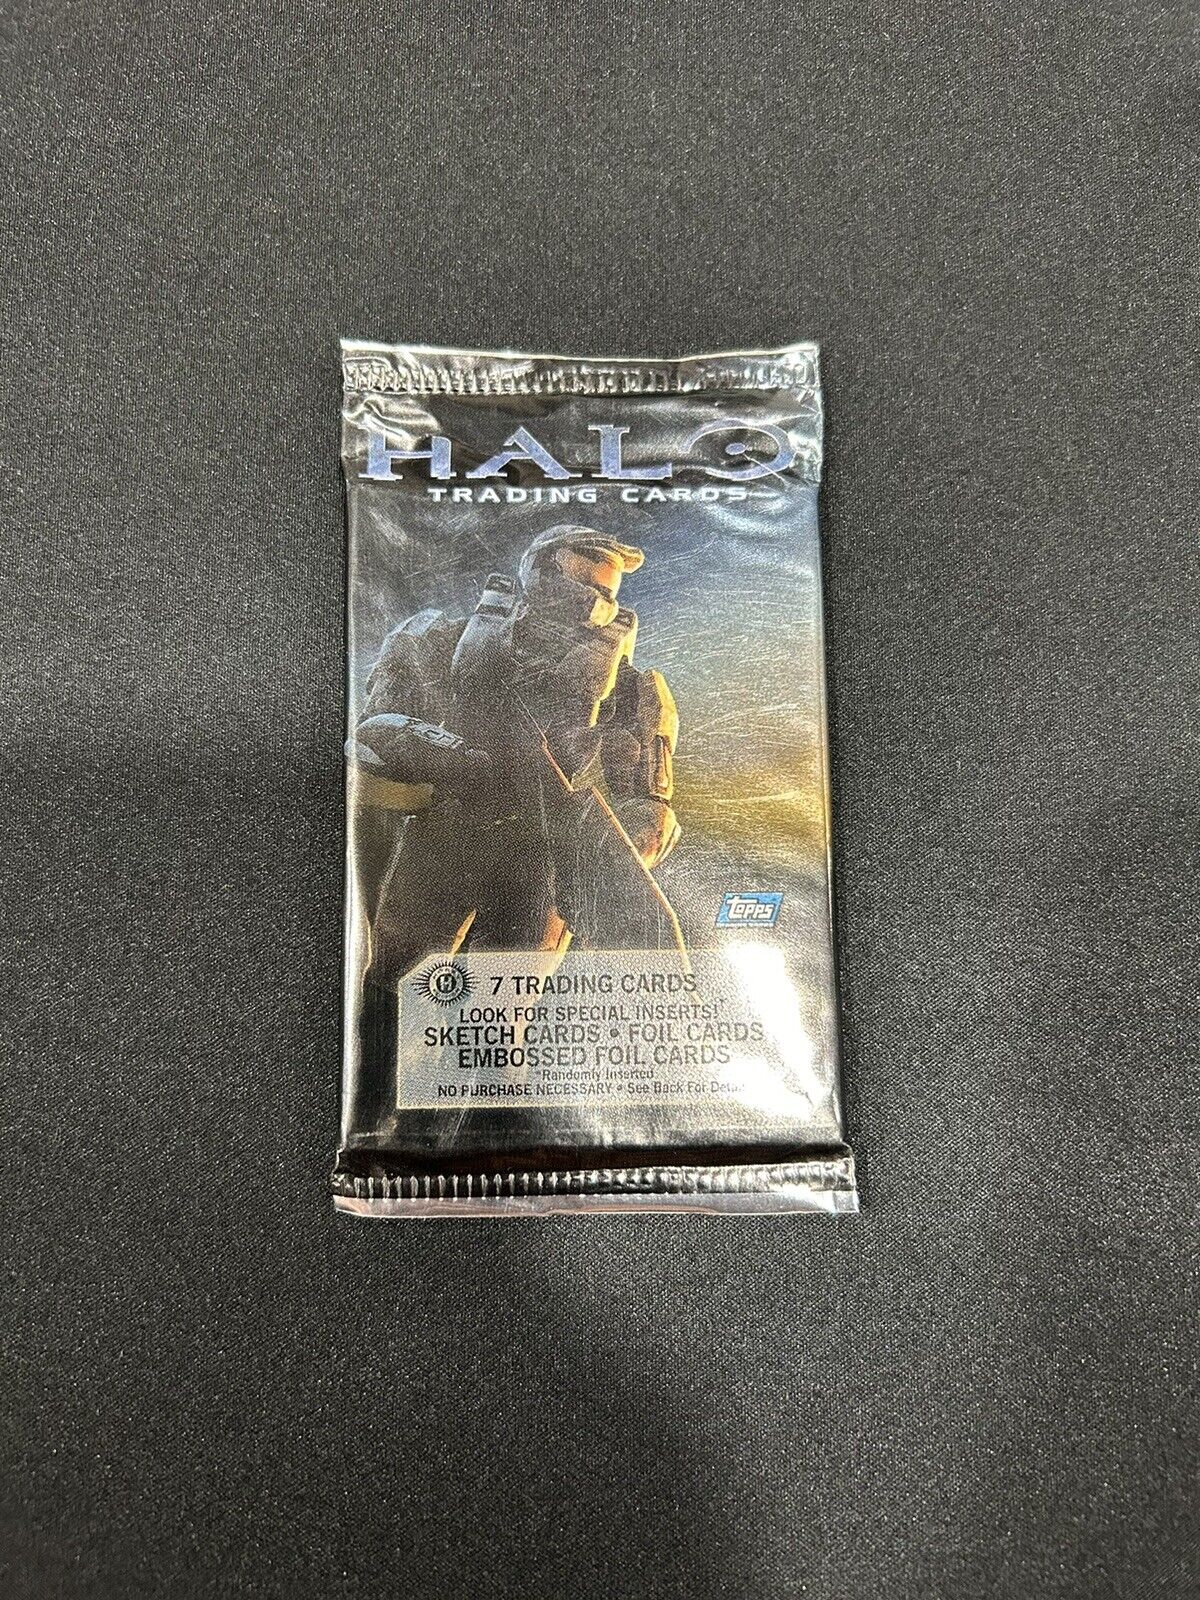 HALO Topps 2007 Trading Card Pack Possible Sketch Cards Etc 7 Cards Sealed Pack